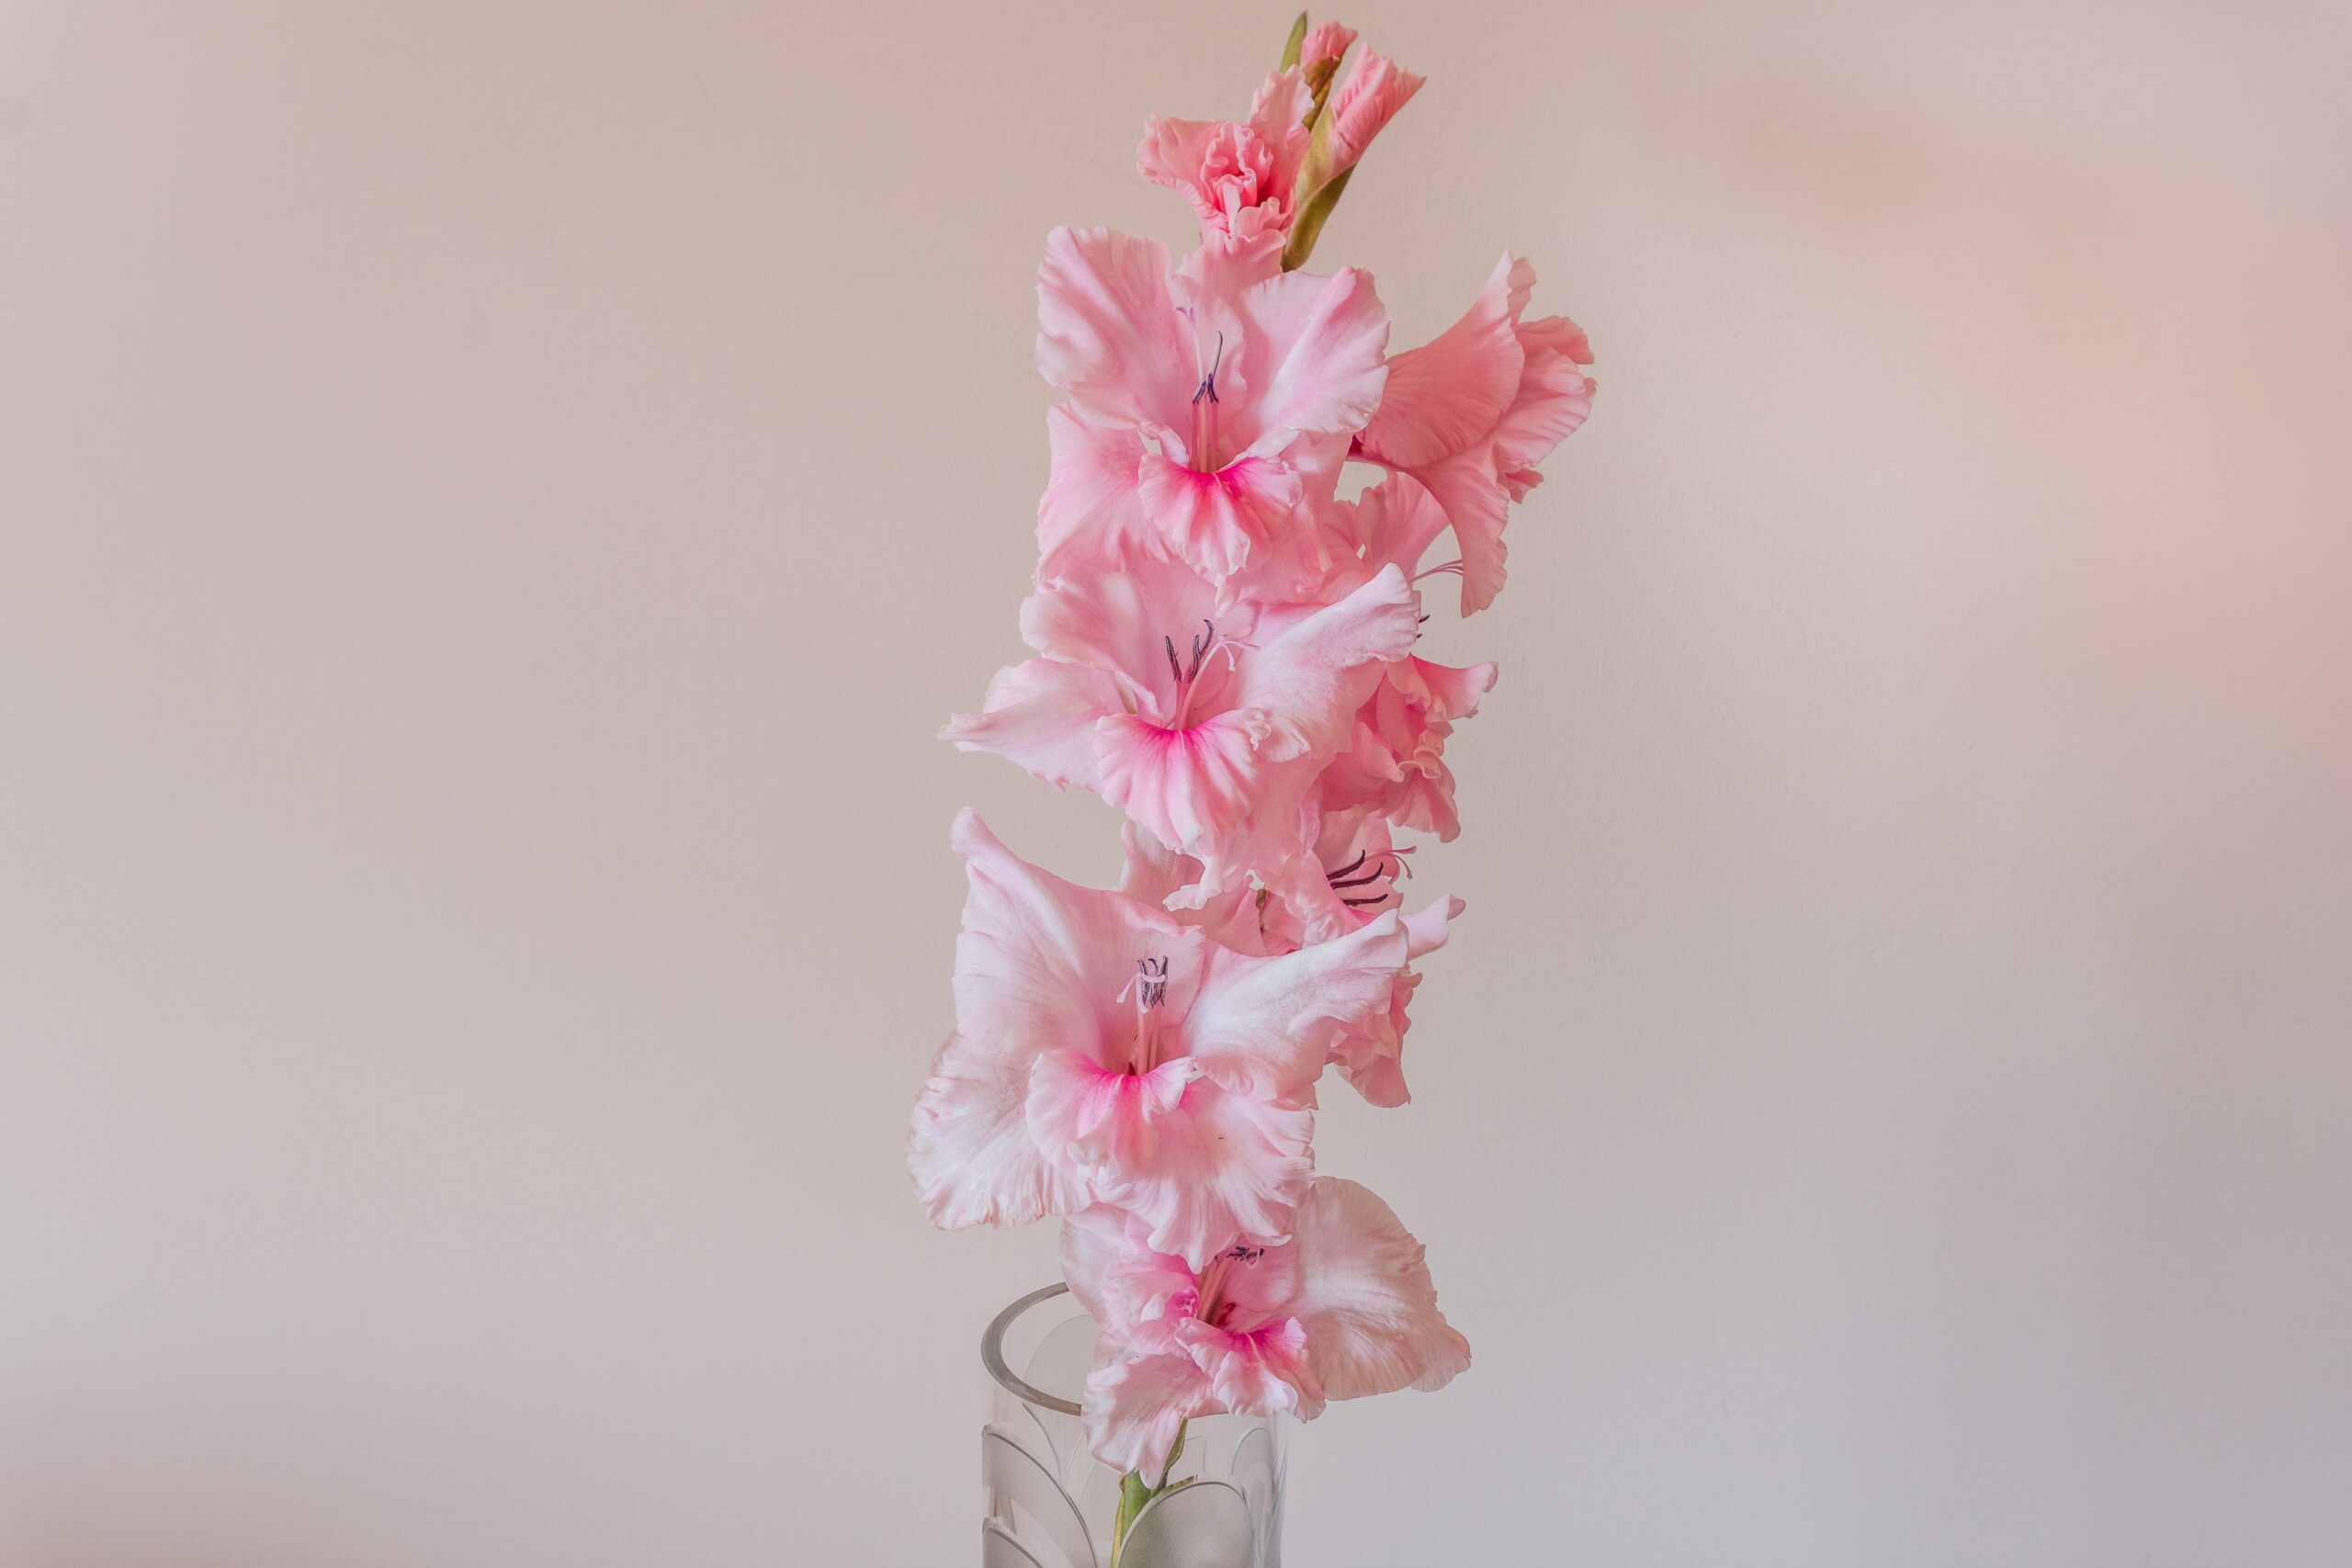 How to grow gladiola